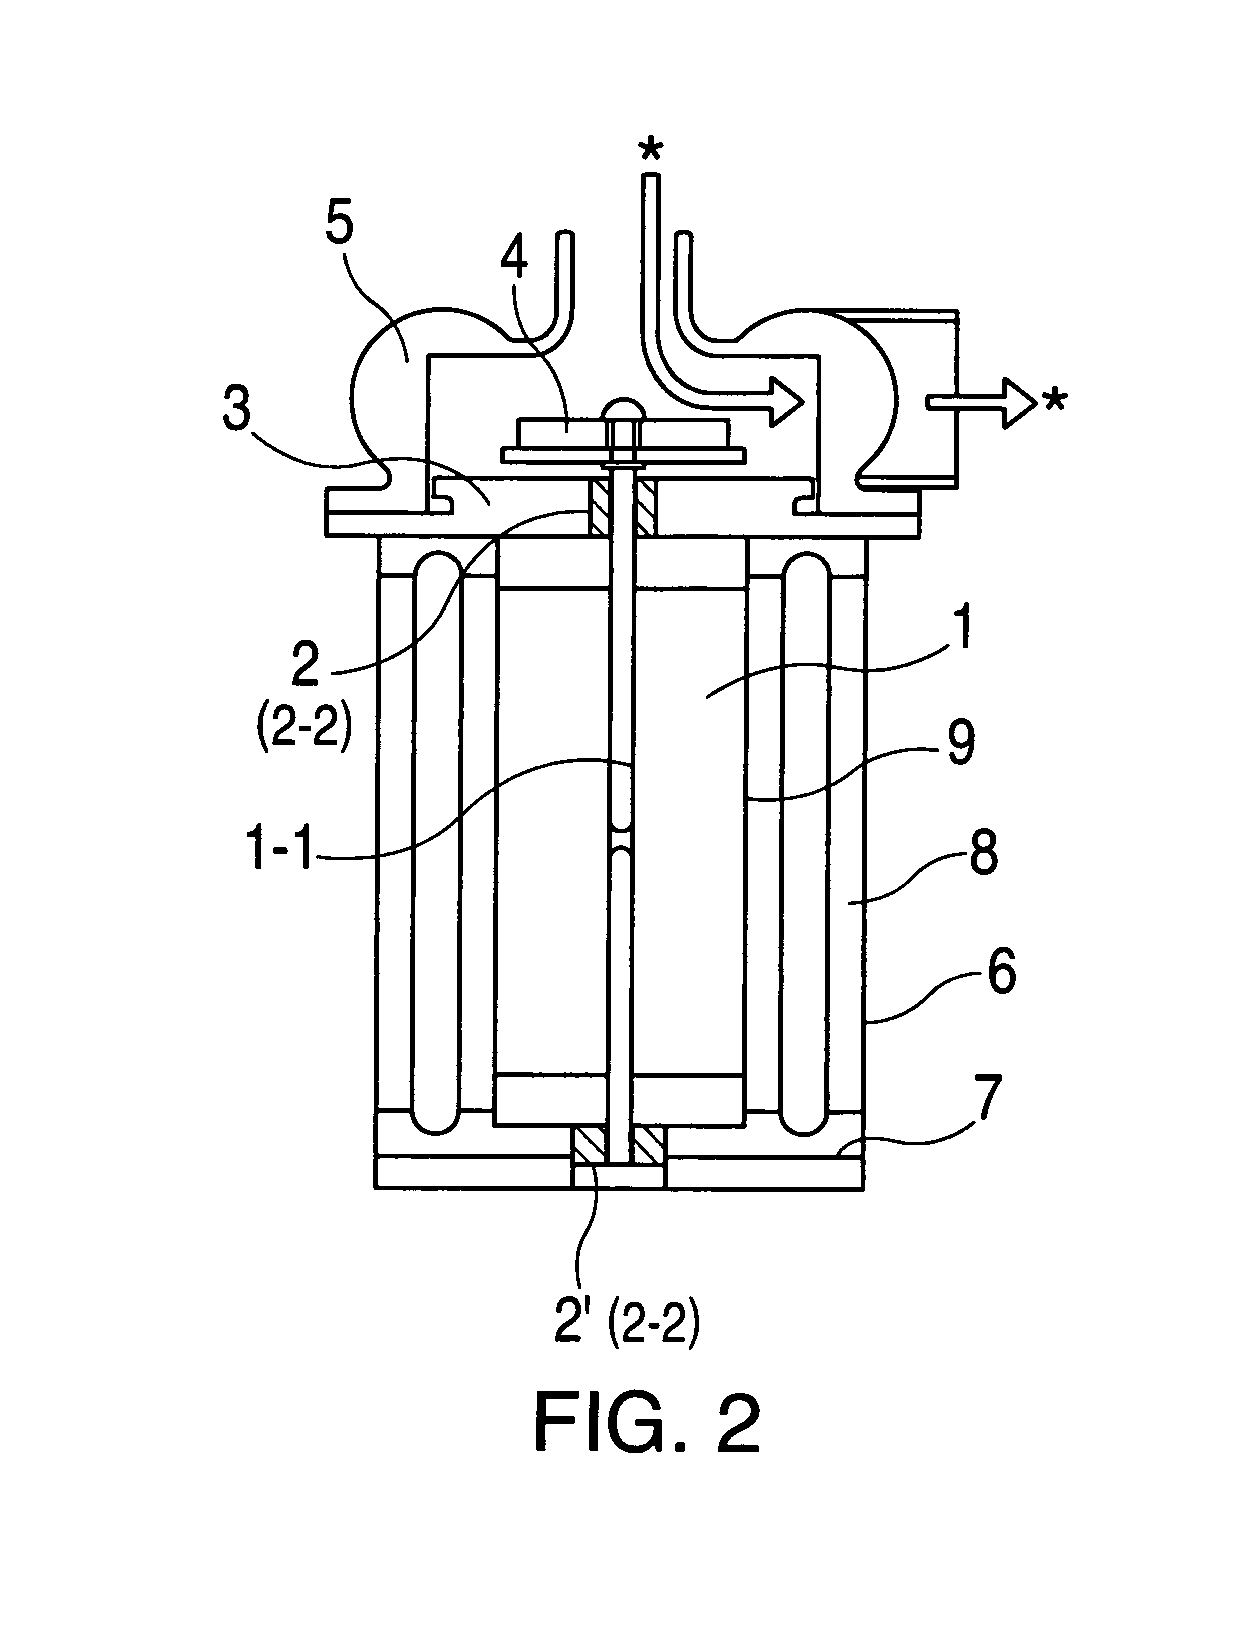 Electrically motorized pump having a submersible sleeve bearing